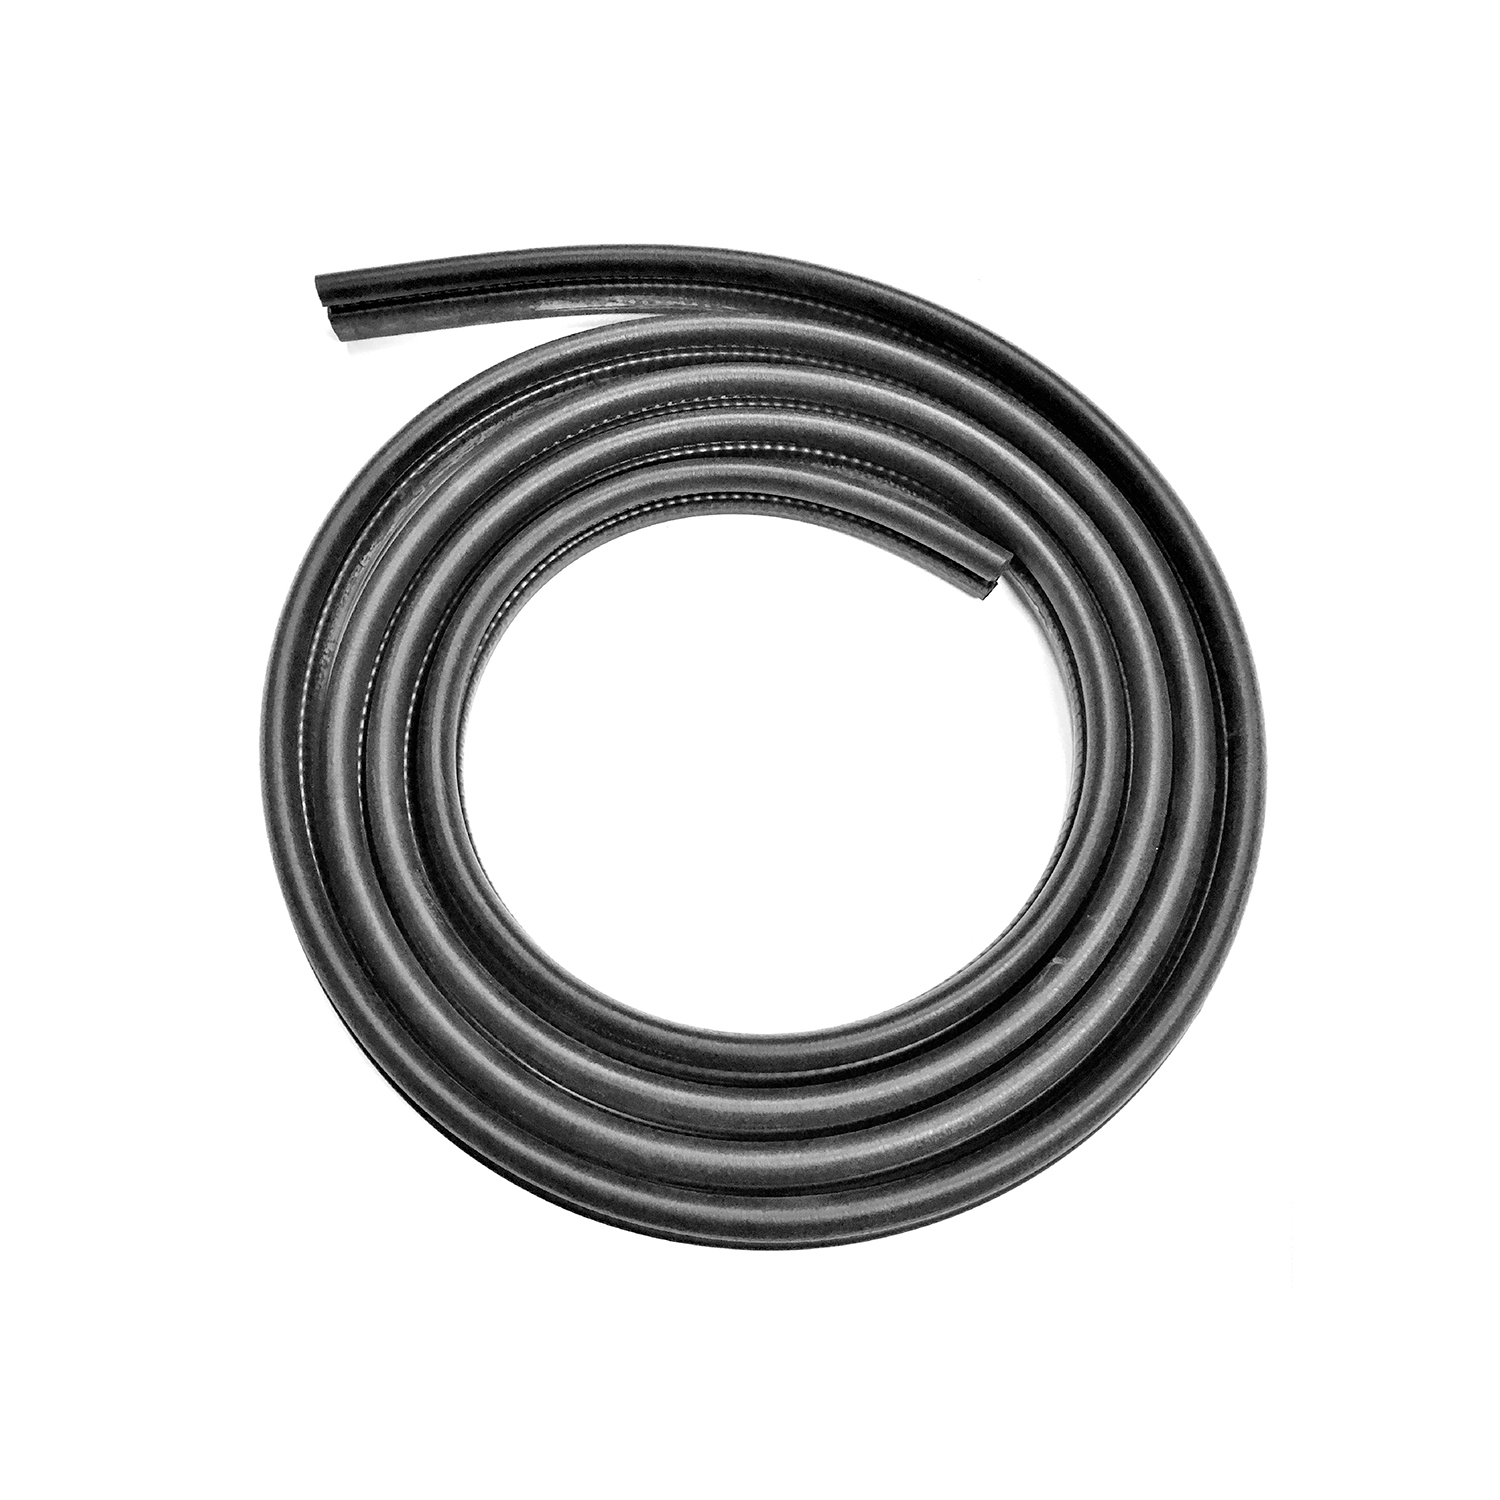 2009 Ford E-350 Super Duty Door seal, '04-'14 Ford E-Series full size van models, fits front left or right-LM 110-VH